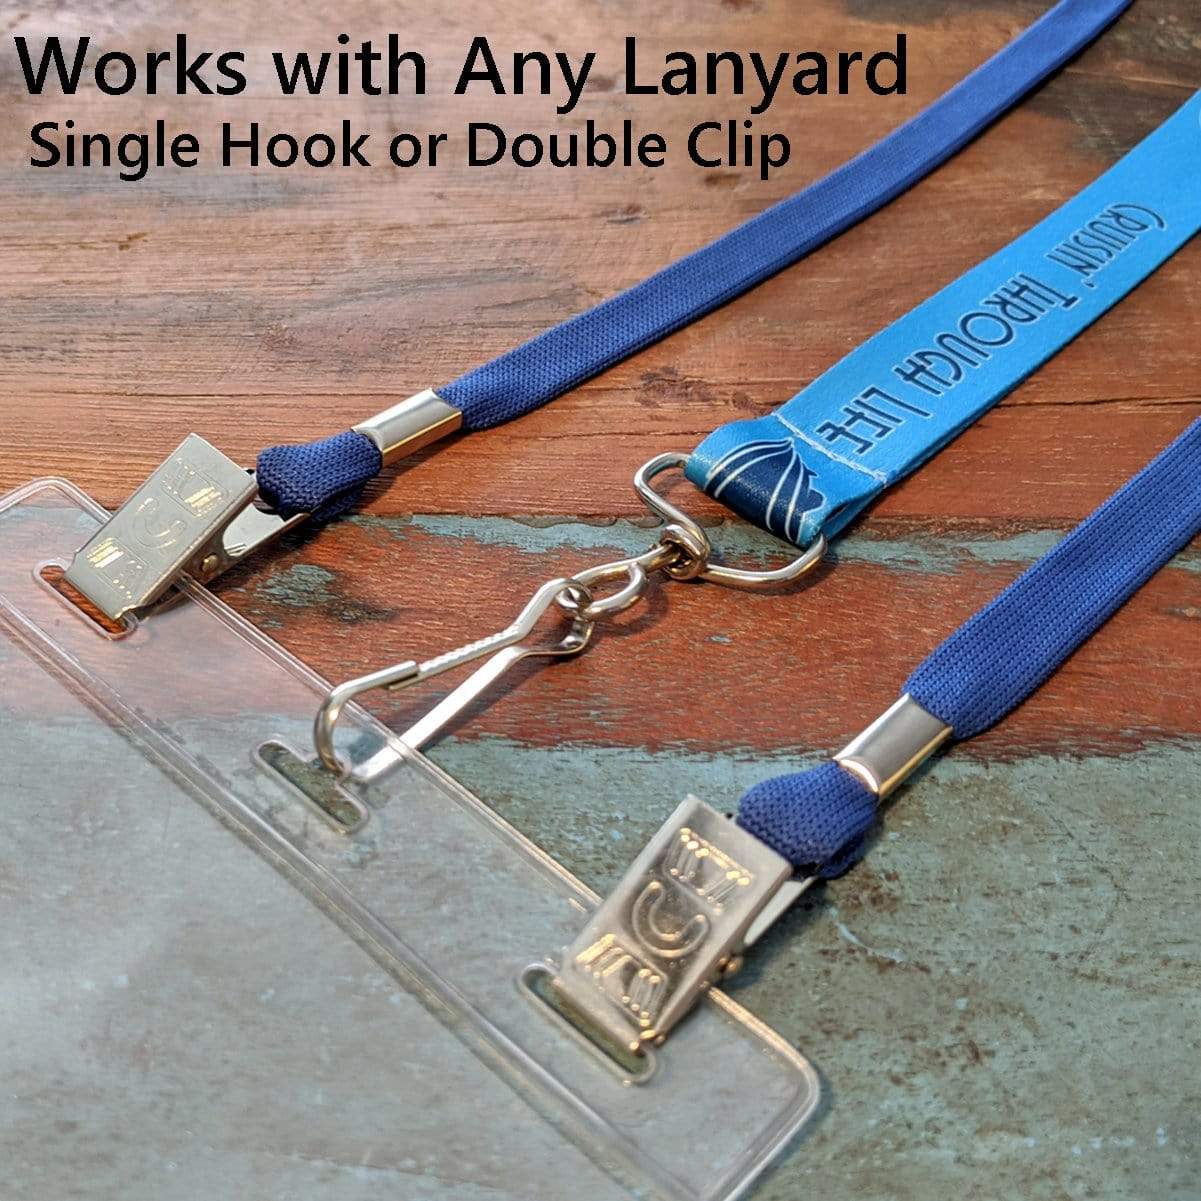 A Vertical Oversized 4X6 Vinyl ID Badge Holder (XL46V) is compatible with single hook and double clip lanyards, as shown with two blue lanyards attached.